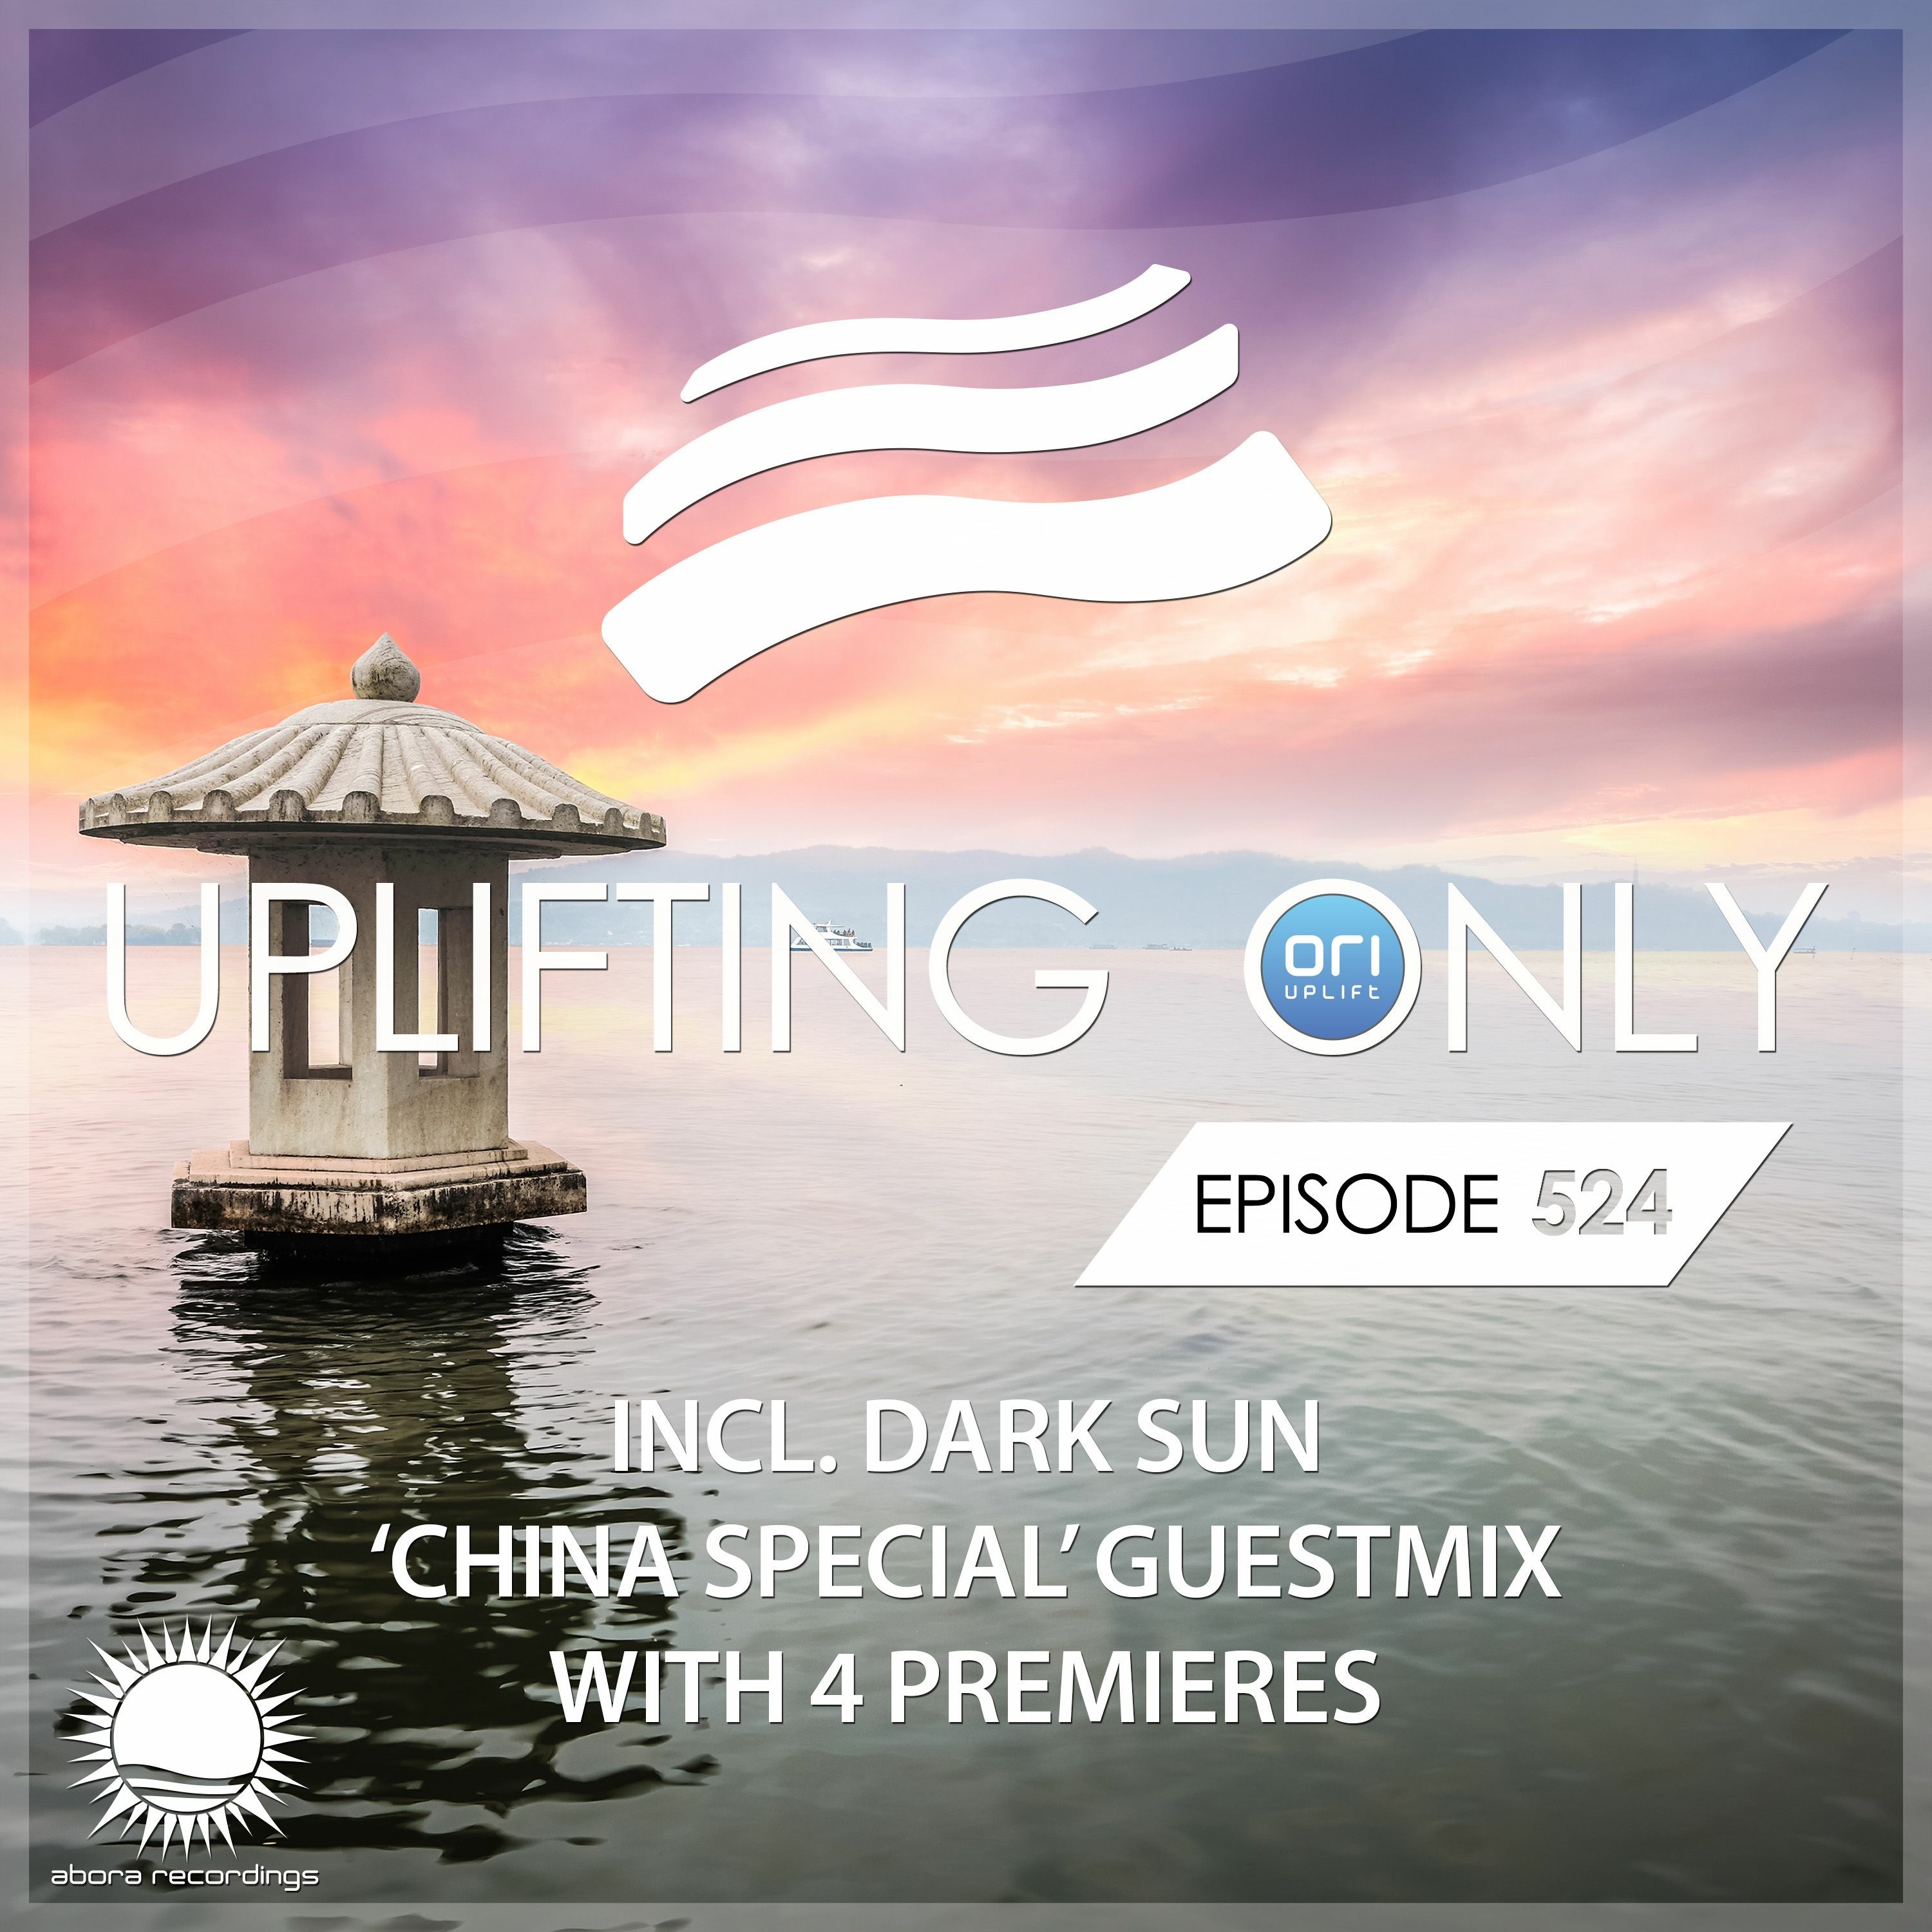 Uplifting Only 524 (incl. Dark Sun ’China Special’ Guestmix) (Feb 23, 2023)